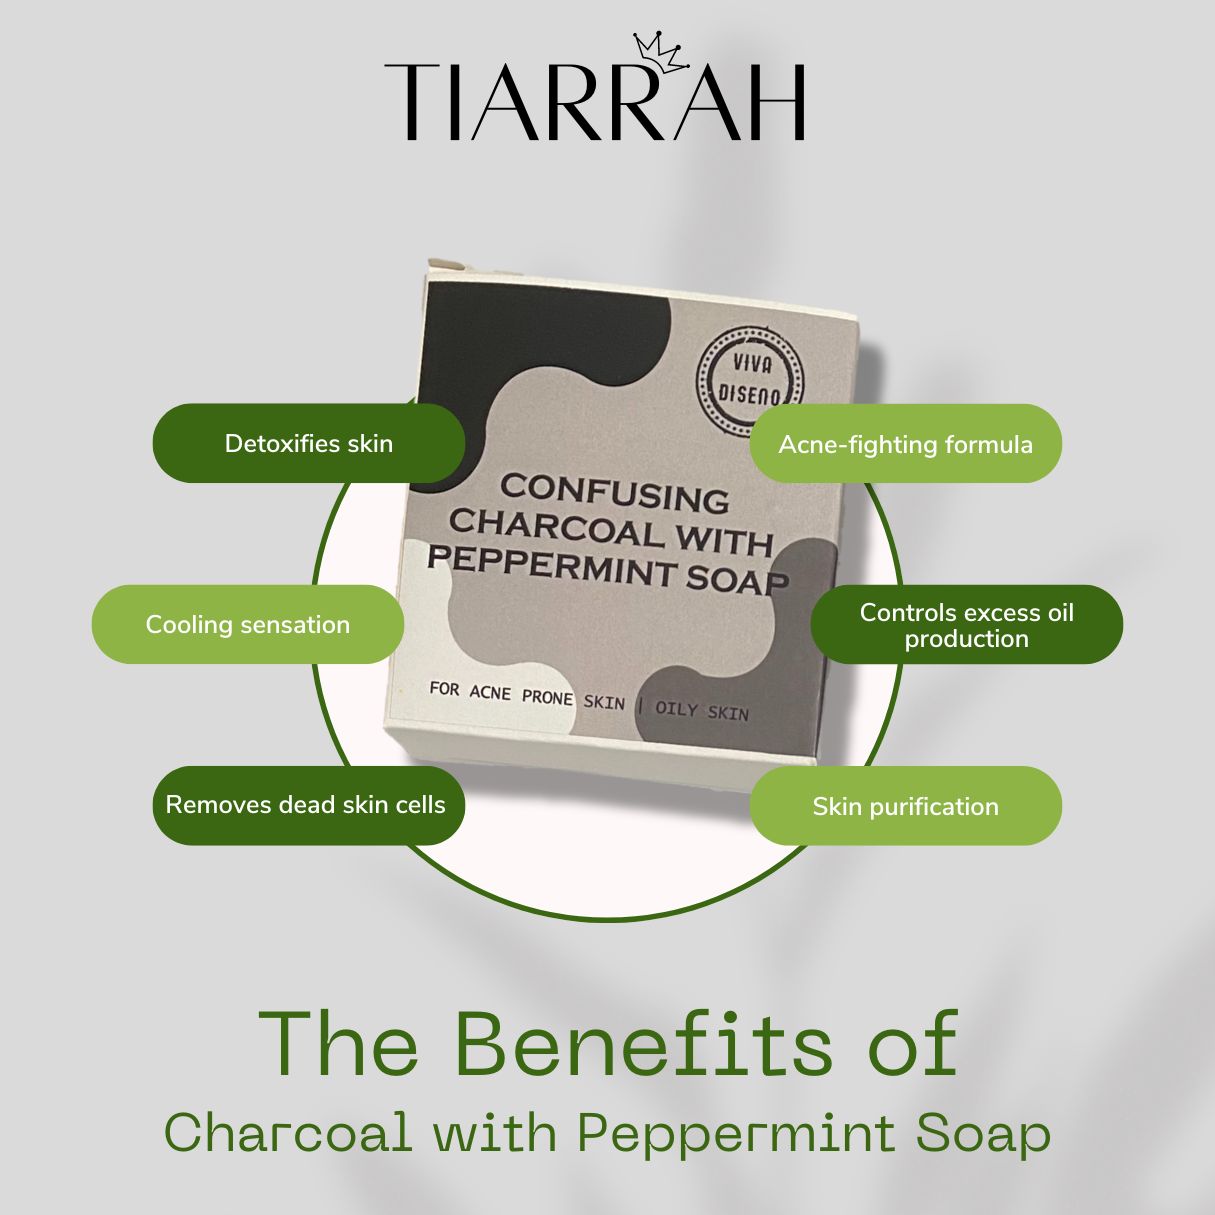 Tiarrah's Charcoal and Peppermint Soap: Natural & Non-Toxic - The Luxury Bath and Body Care Shop